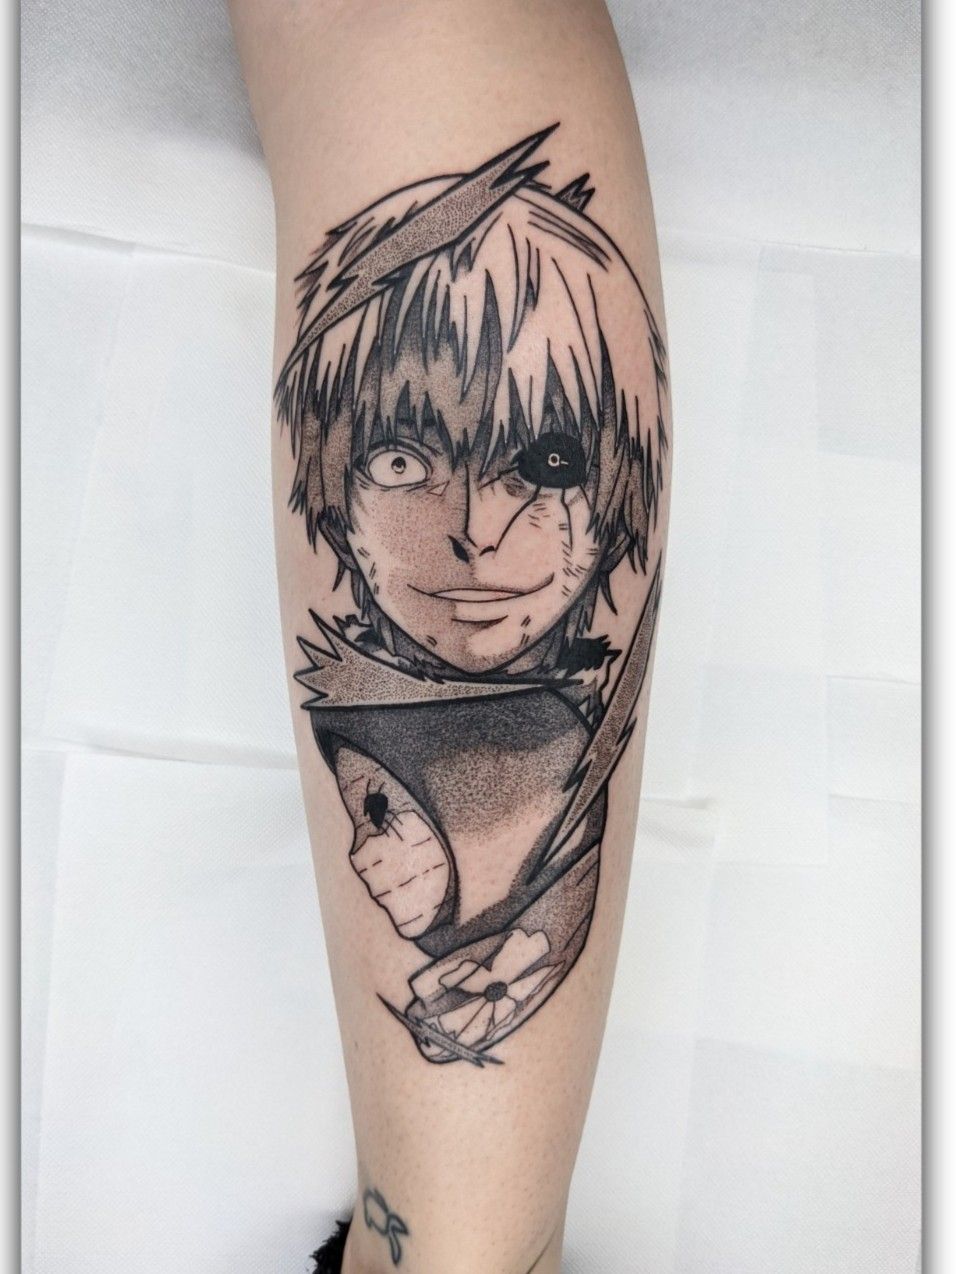 Temporory Tattoo Tokyo Ghoul Uta Arm Chest Neck Hand Finger Cosplay Prop   AliExpress